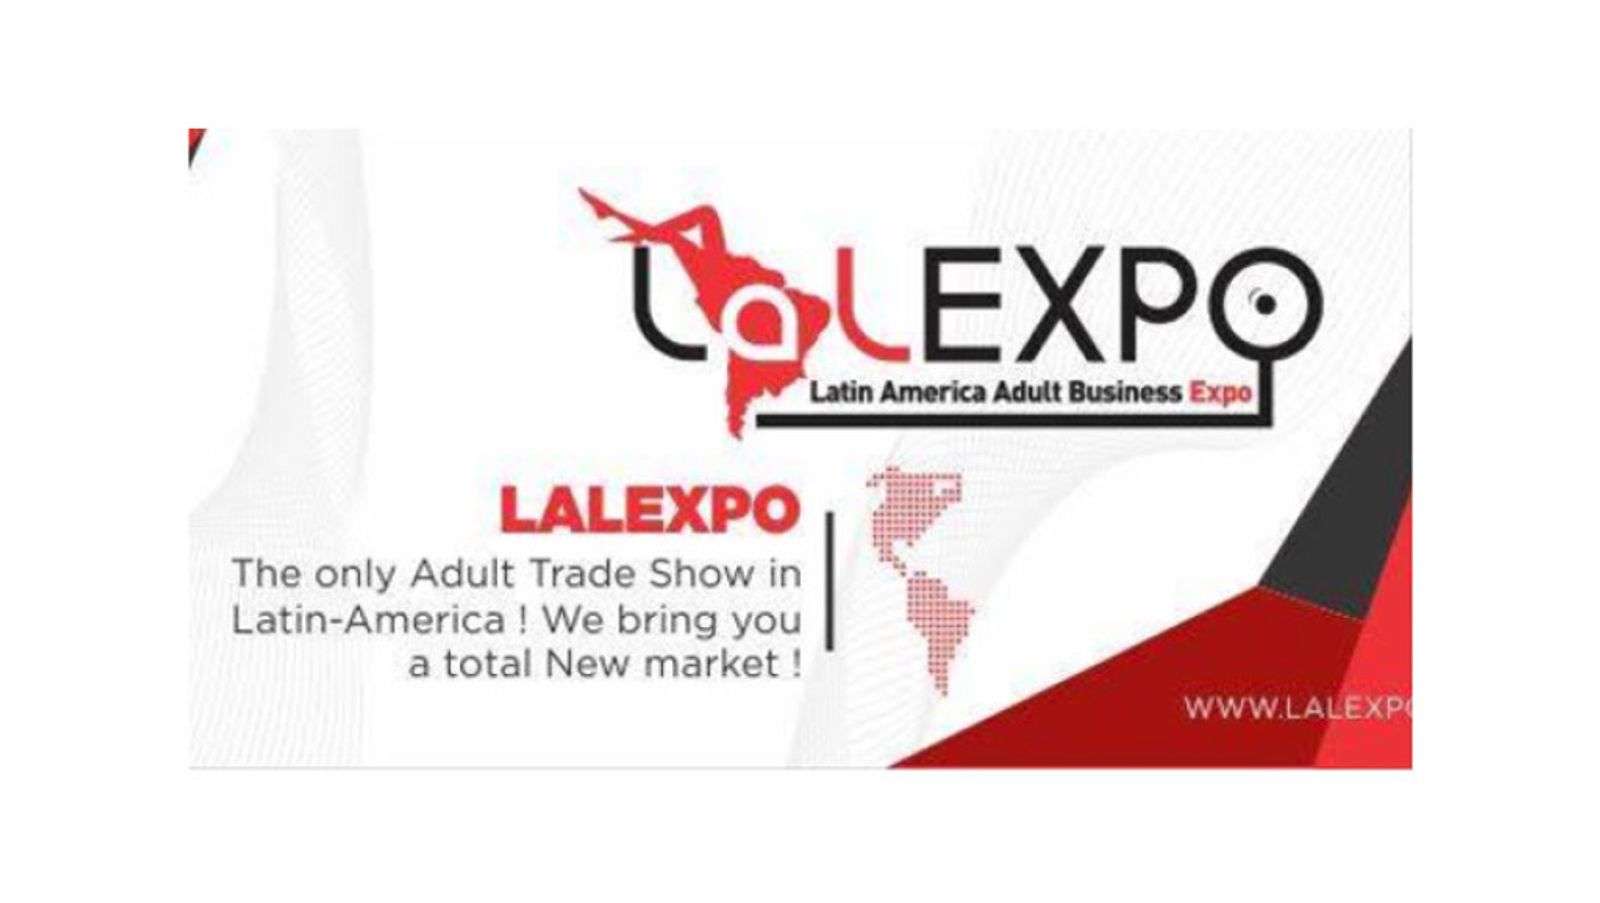 LAL Expo Organizers Release Statement on Controversy in Cartagena